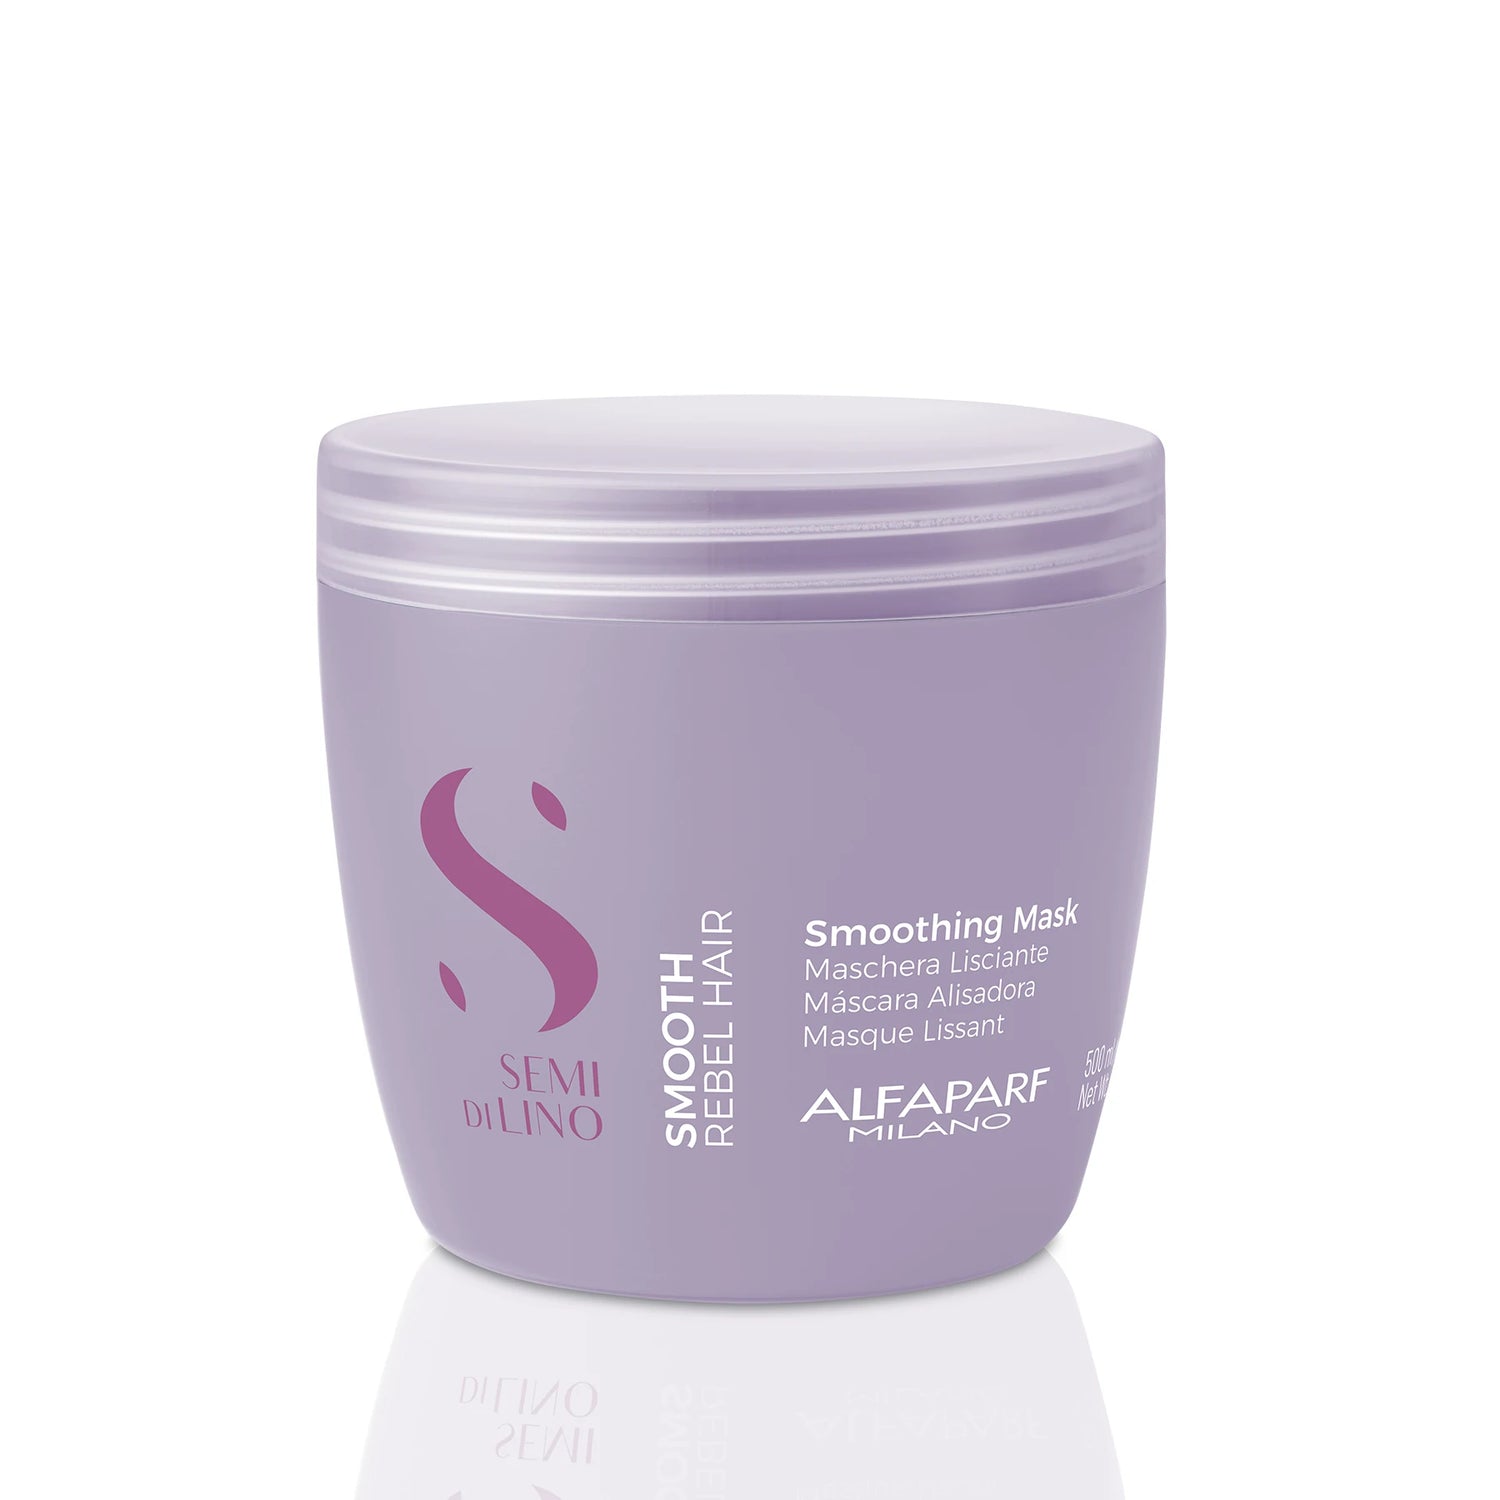 Alfaparf Semi di Lino Smoothing Mask for Frizzy Hair